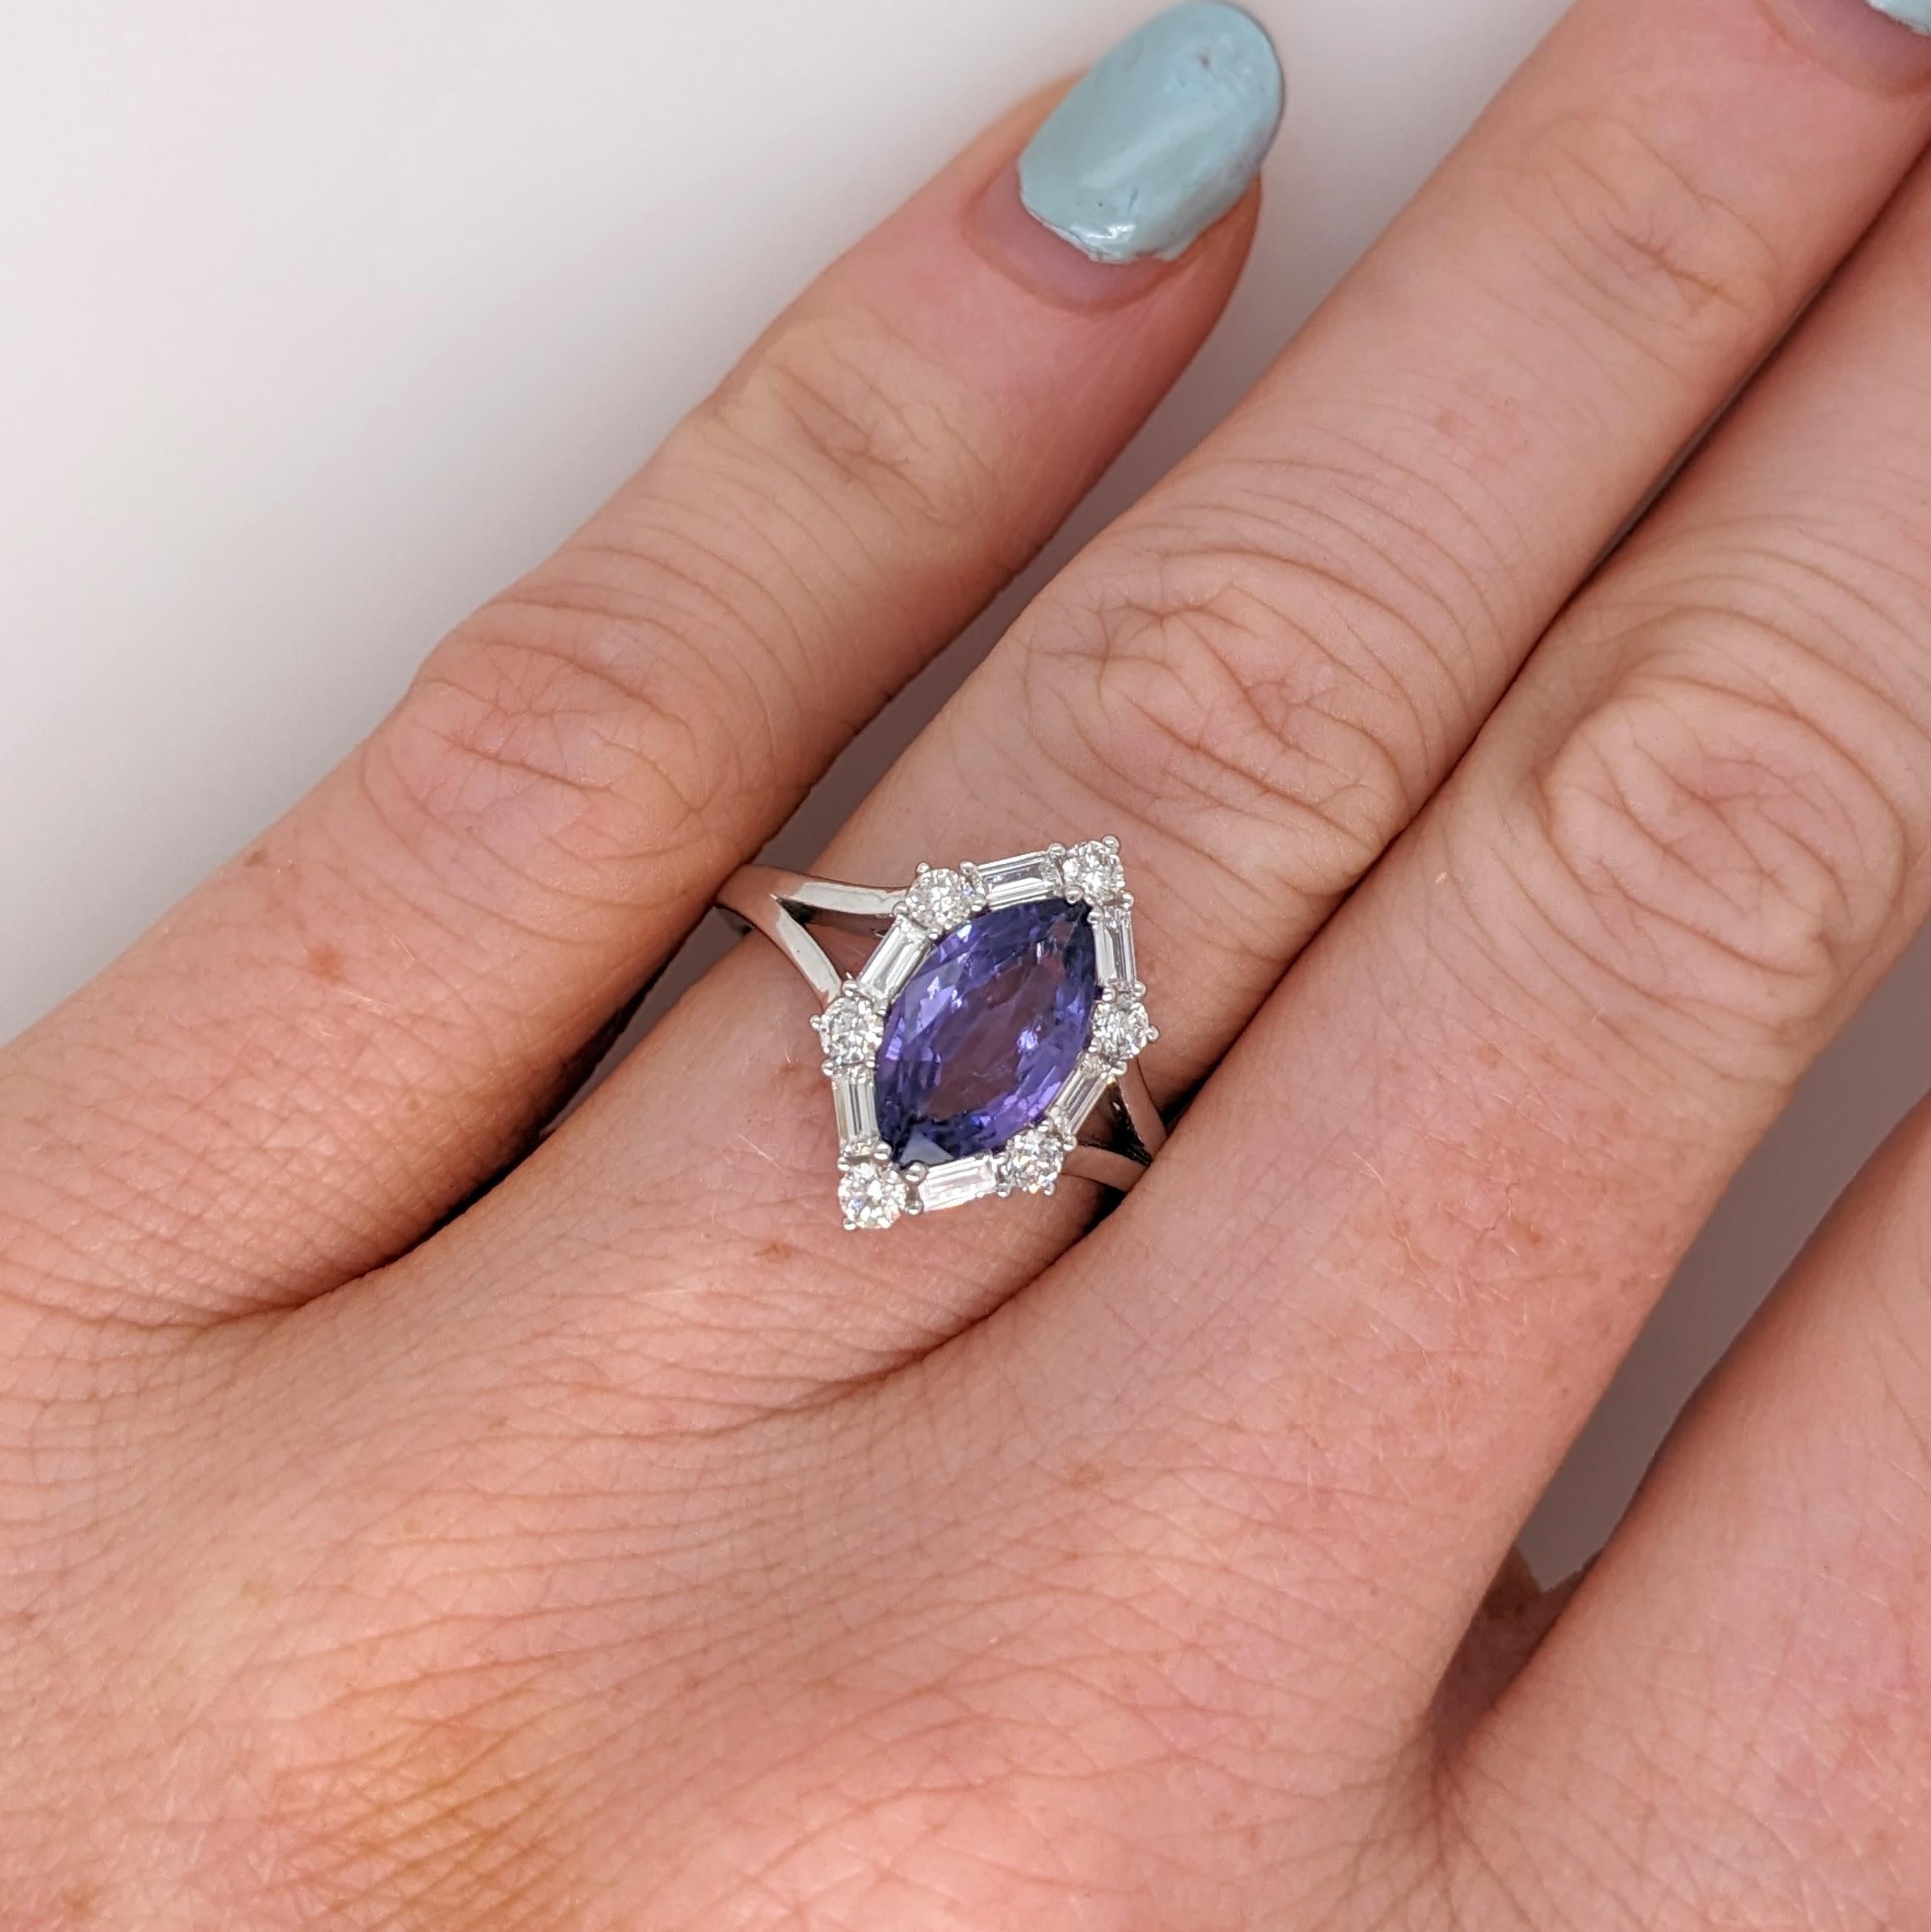 2ct Purple Sapphire Ring w Earth Mined Diamonds in Solid 14K Gold MQ 11x6.5mm In New Condition For Sale In Columbus, OH